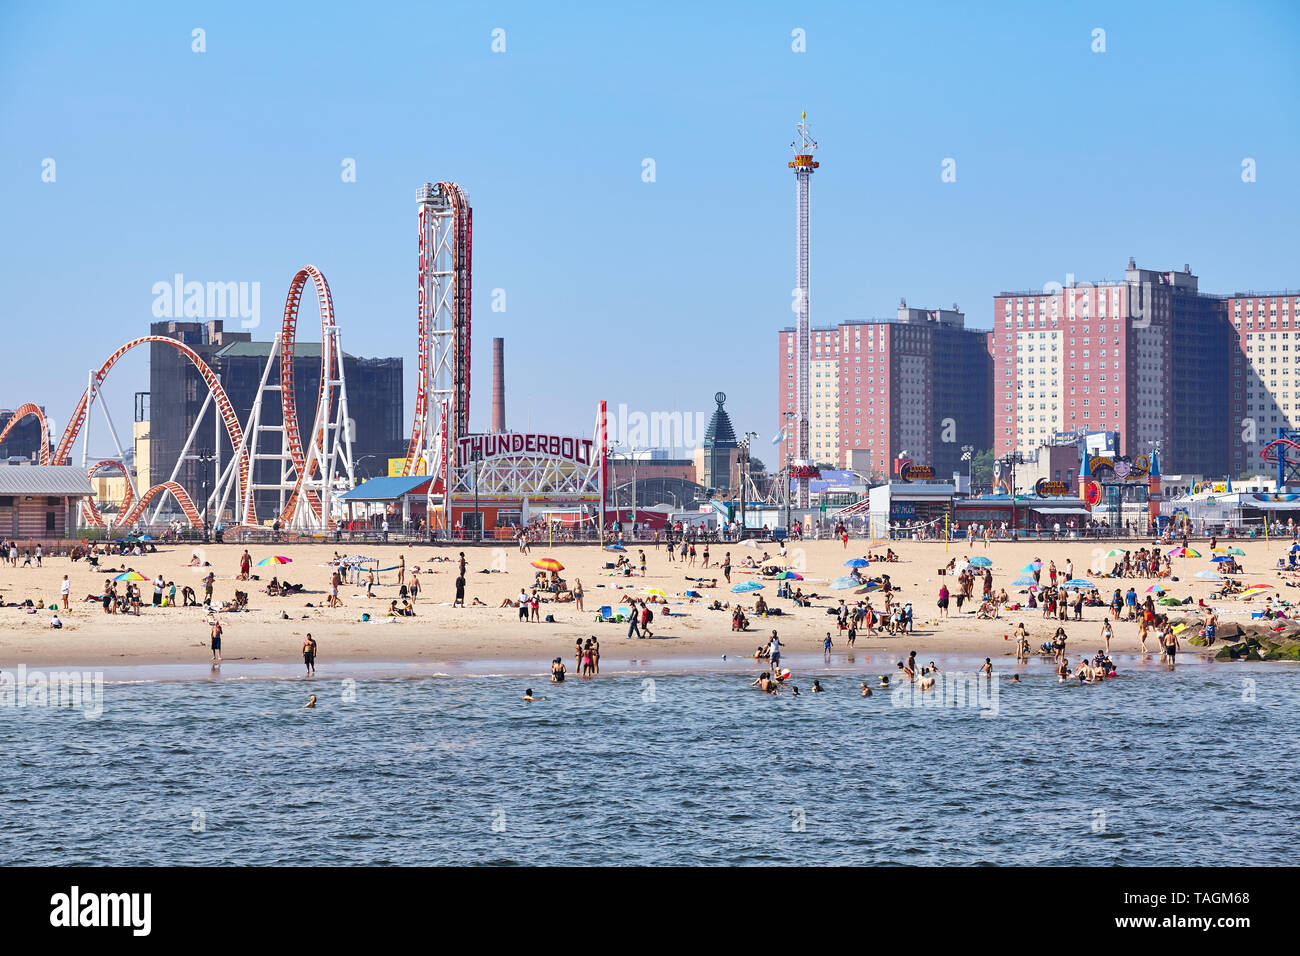 New York, USA - July 02, 2018: Crowded Coney Island beach and amusement parks seen from the pier on a sunny day. Stock Photo